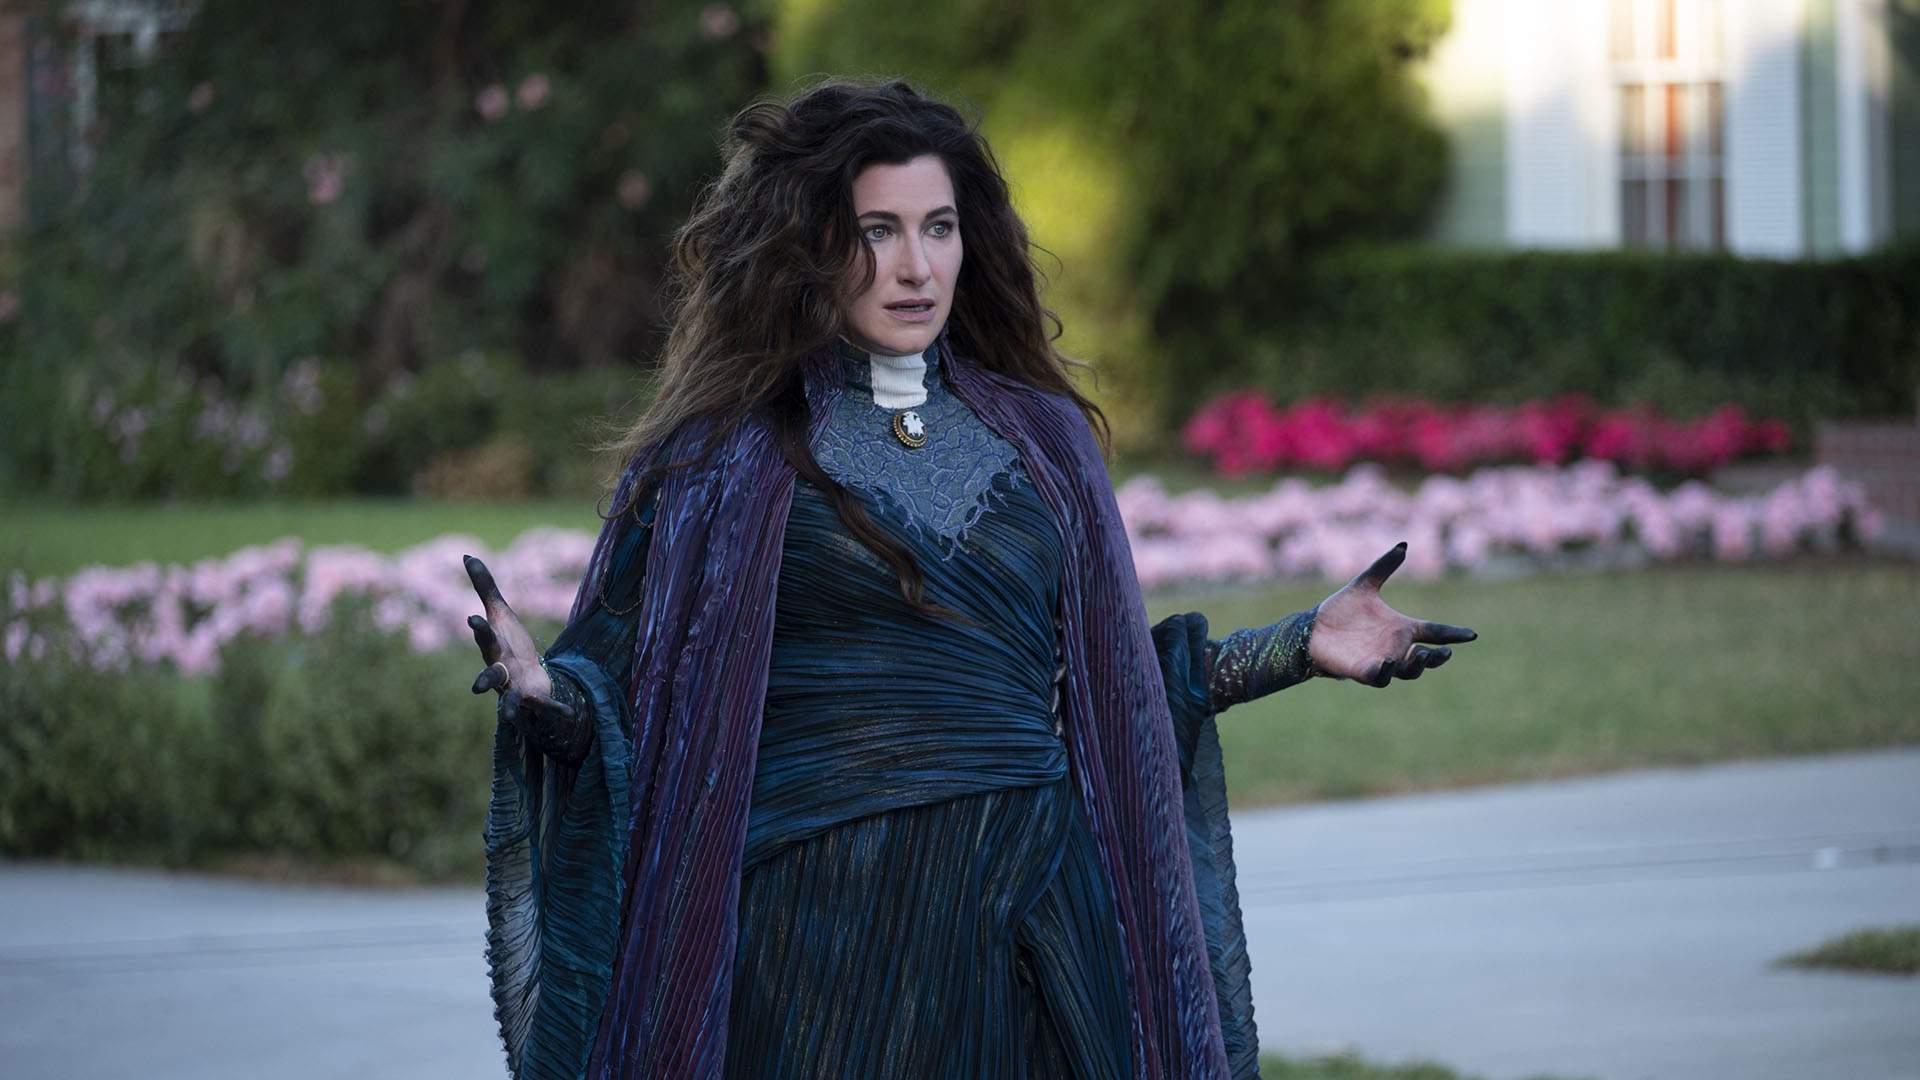 Marvel and Disney+ Are Giving Kathryn Hahn Her Own Witchy 'WandaVision' Spinoff Series